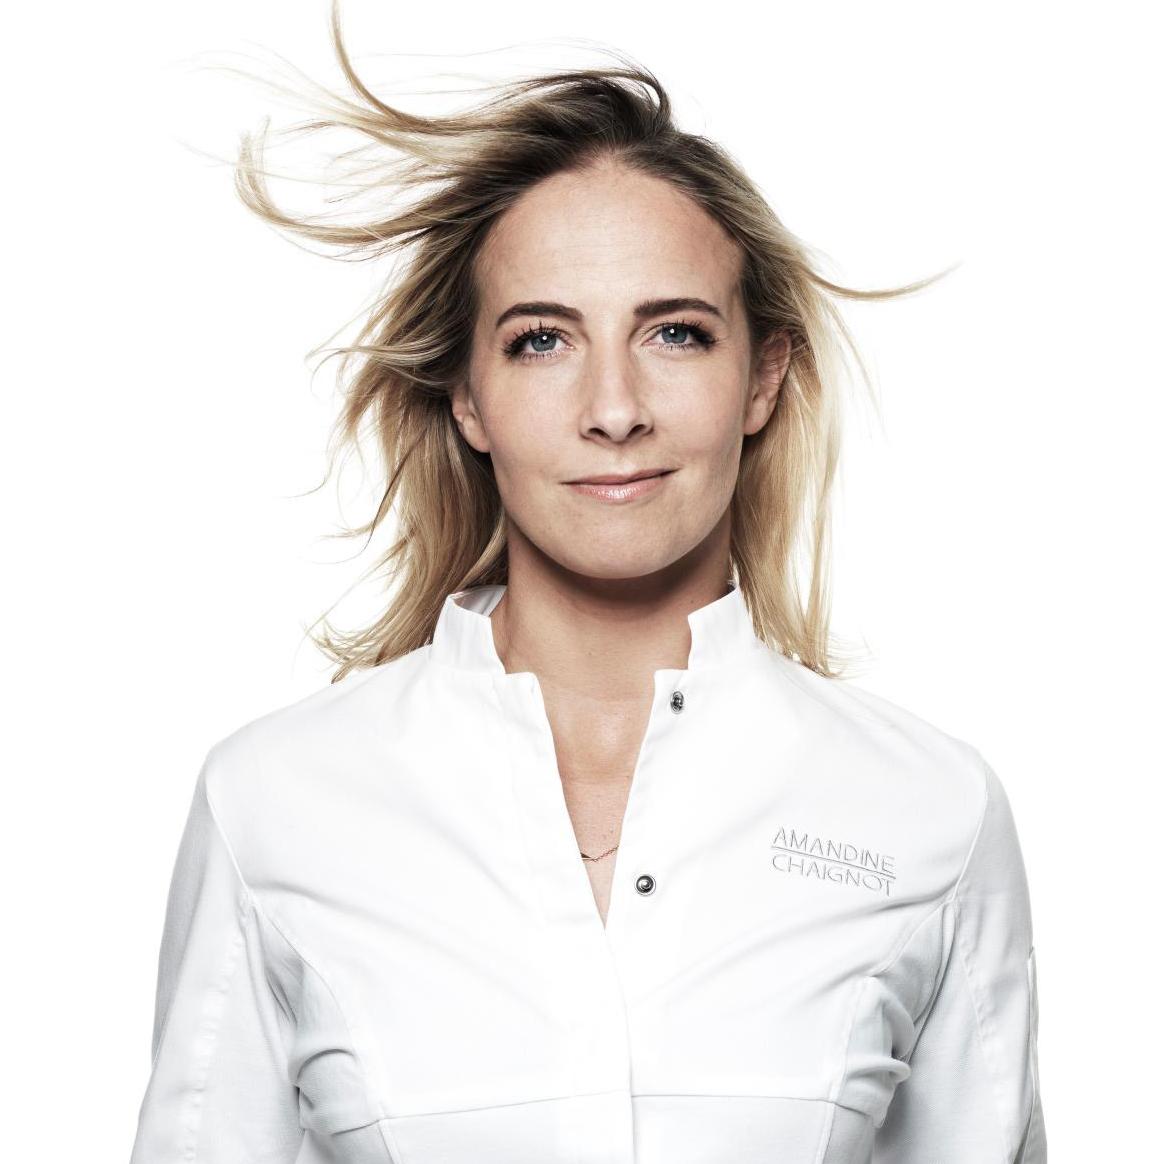 MasterChef's Amandine Chaignot Is Inspired by Danish Design - 6 Questions for